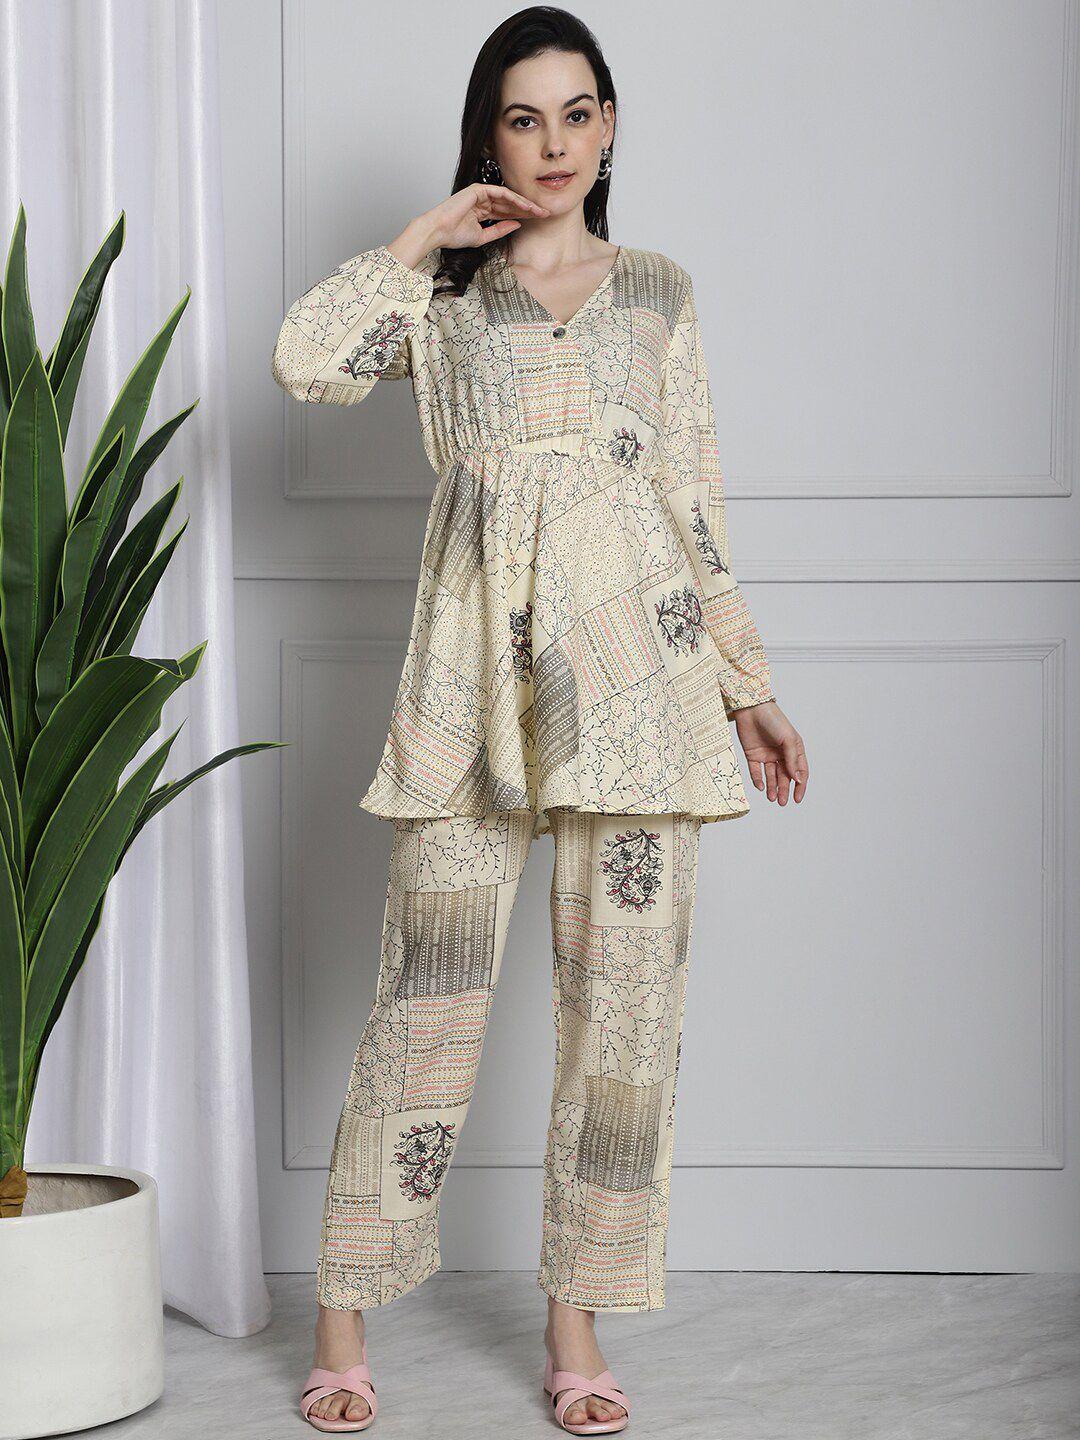 frempy floral printed tunic with trouser co-ords